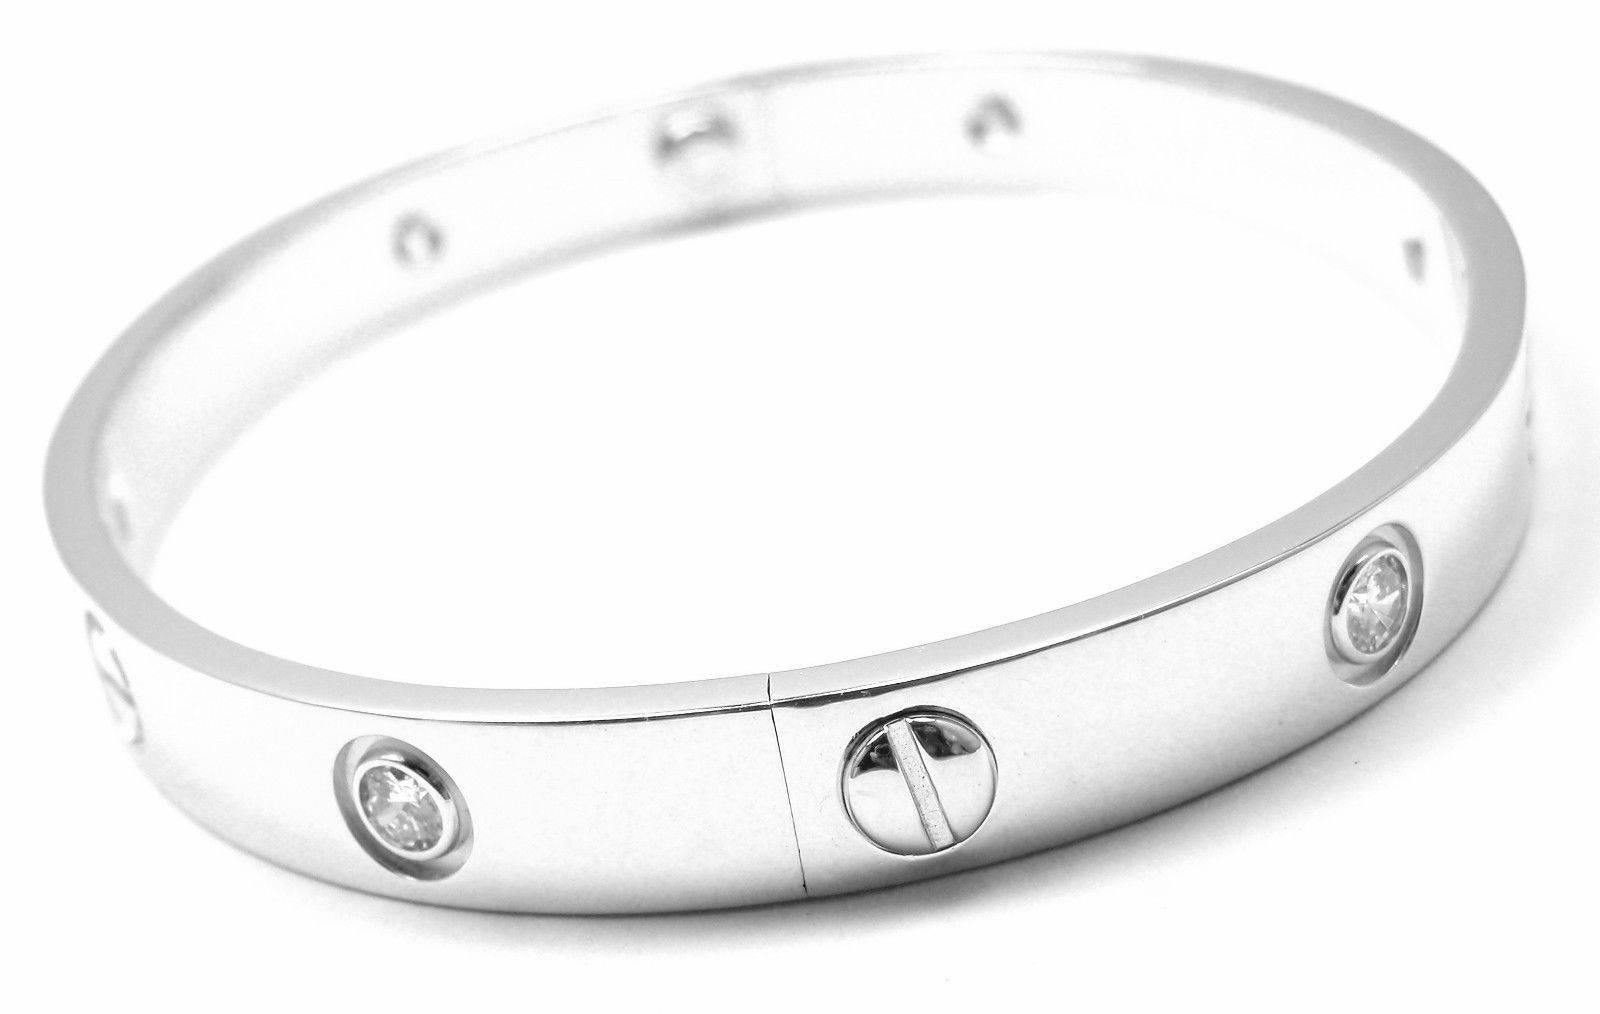 18k White Gold Cartier LOVE Bangle Bracelet, size 17.
With 6 brilliant round cut diamonds, VS1 clarity, E-F color total weight approx. .30ct
This bracelet comes with original Cartier box and a screwdriver.

Details:
Size: 17cm
Weight:  31.6